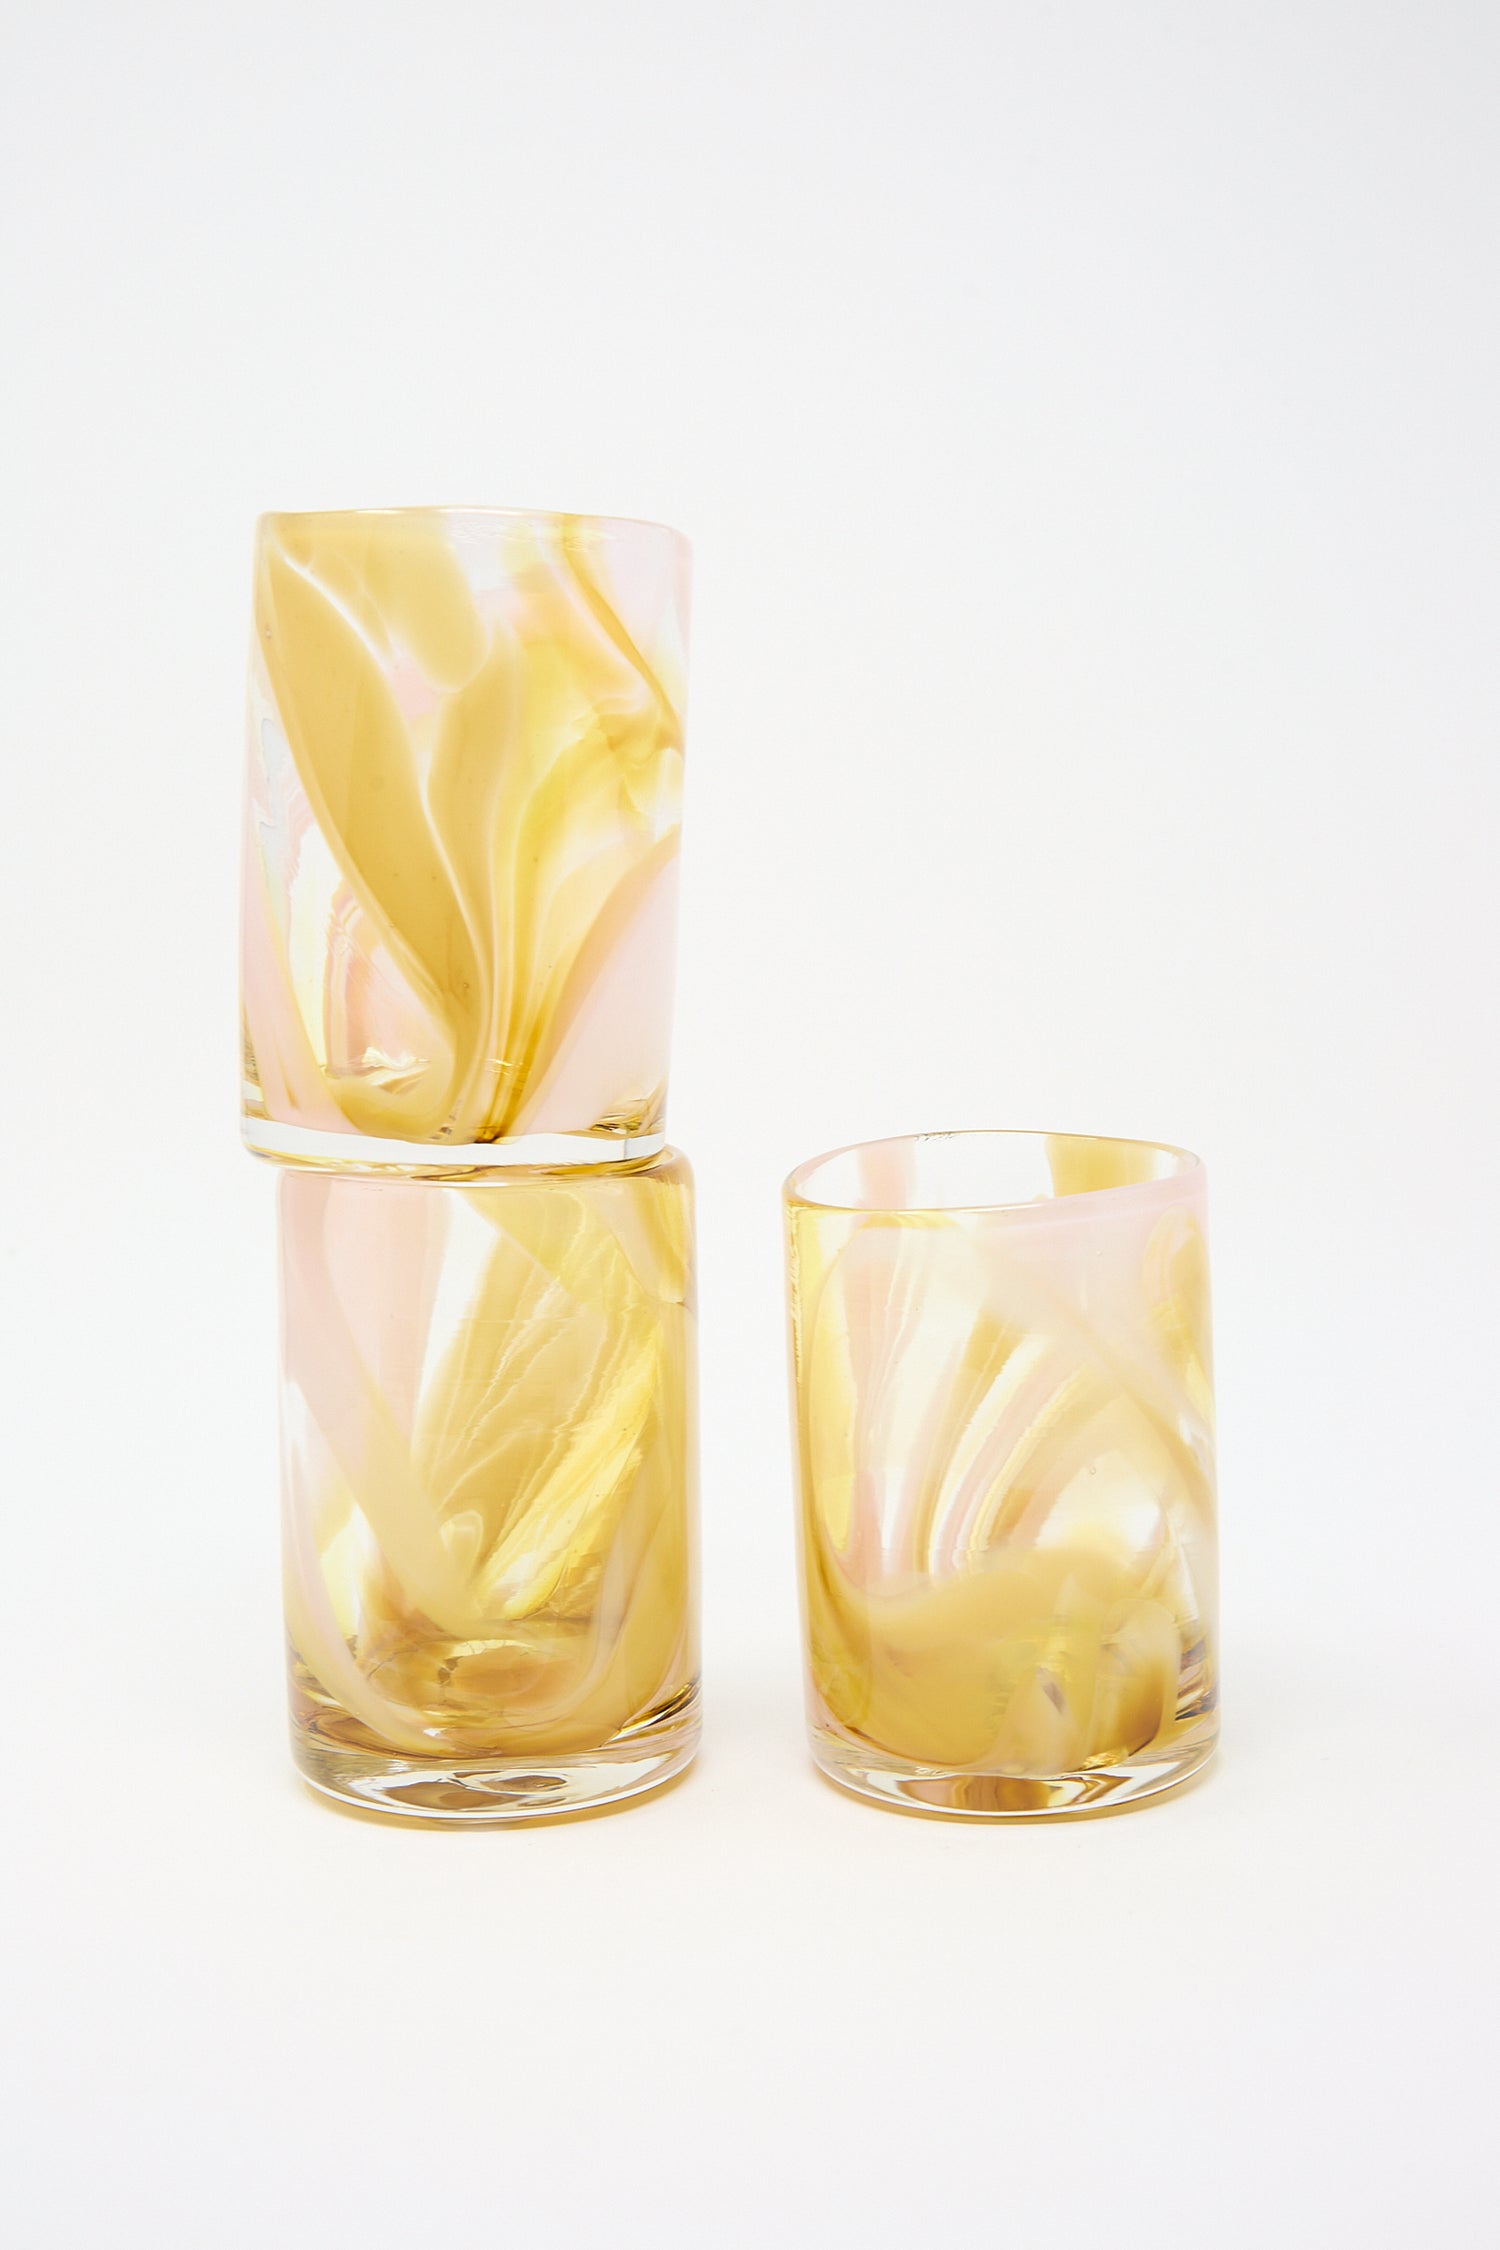 Two Frankie Cup hand blown glass tumblers, one stacked on top of the other, against a white background. Brand Name: Upstate